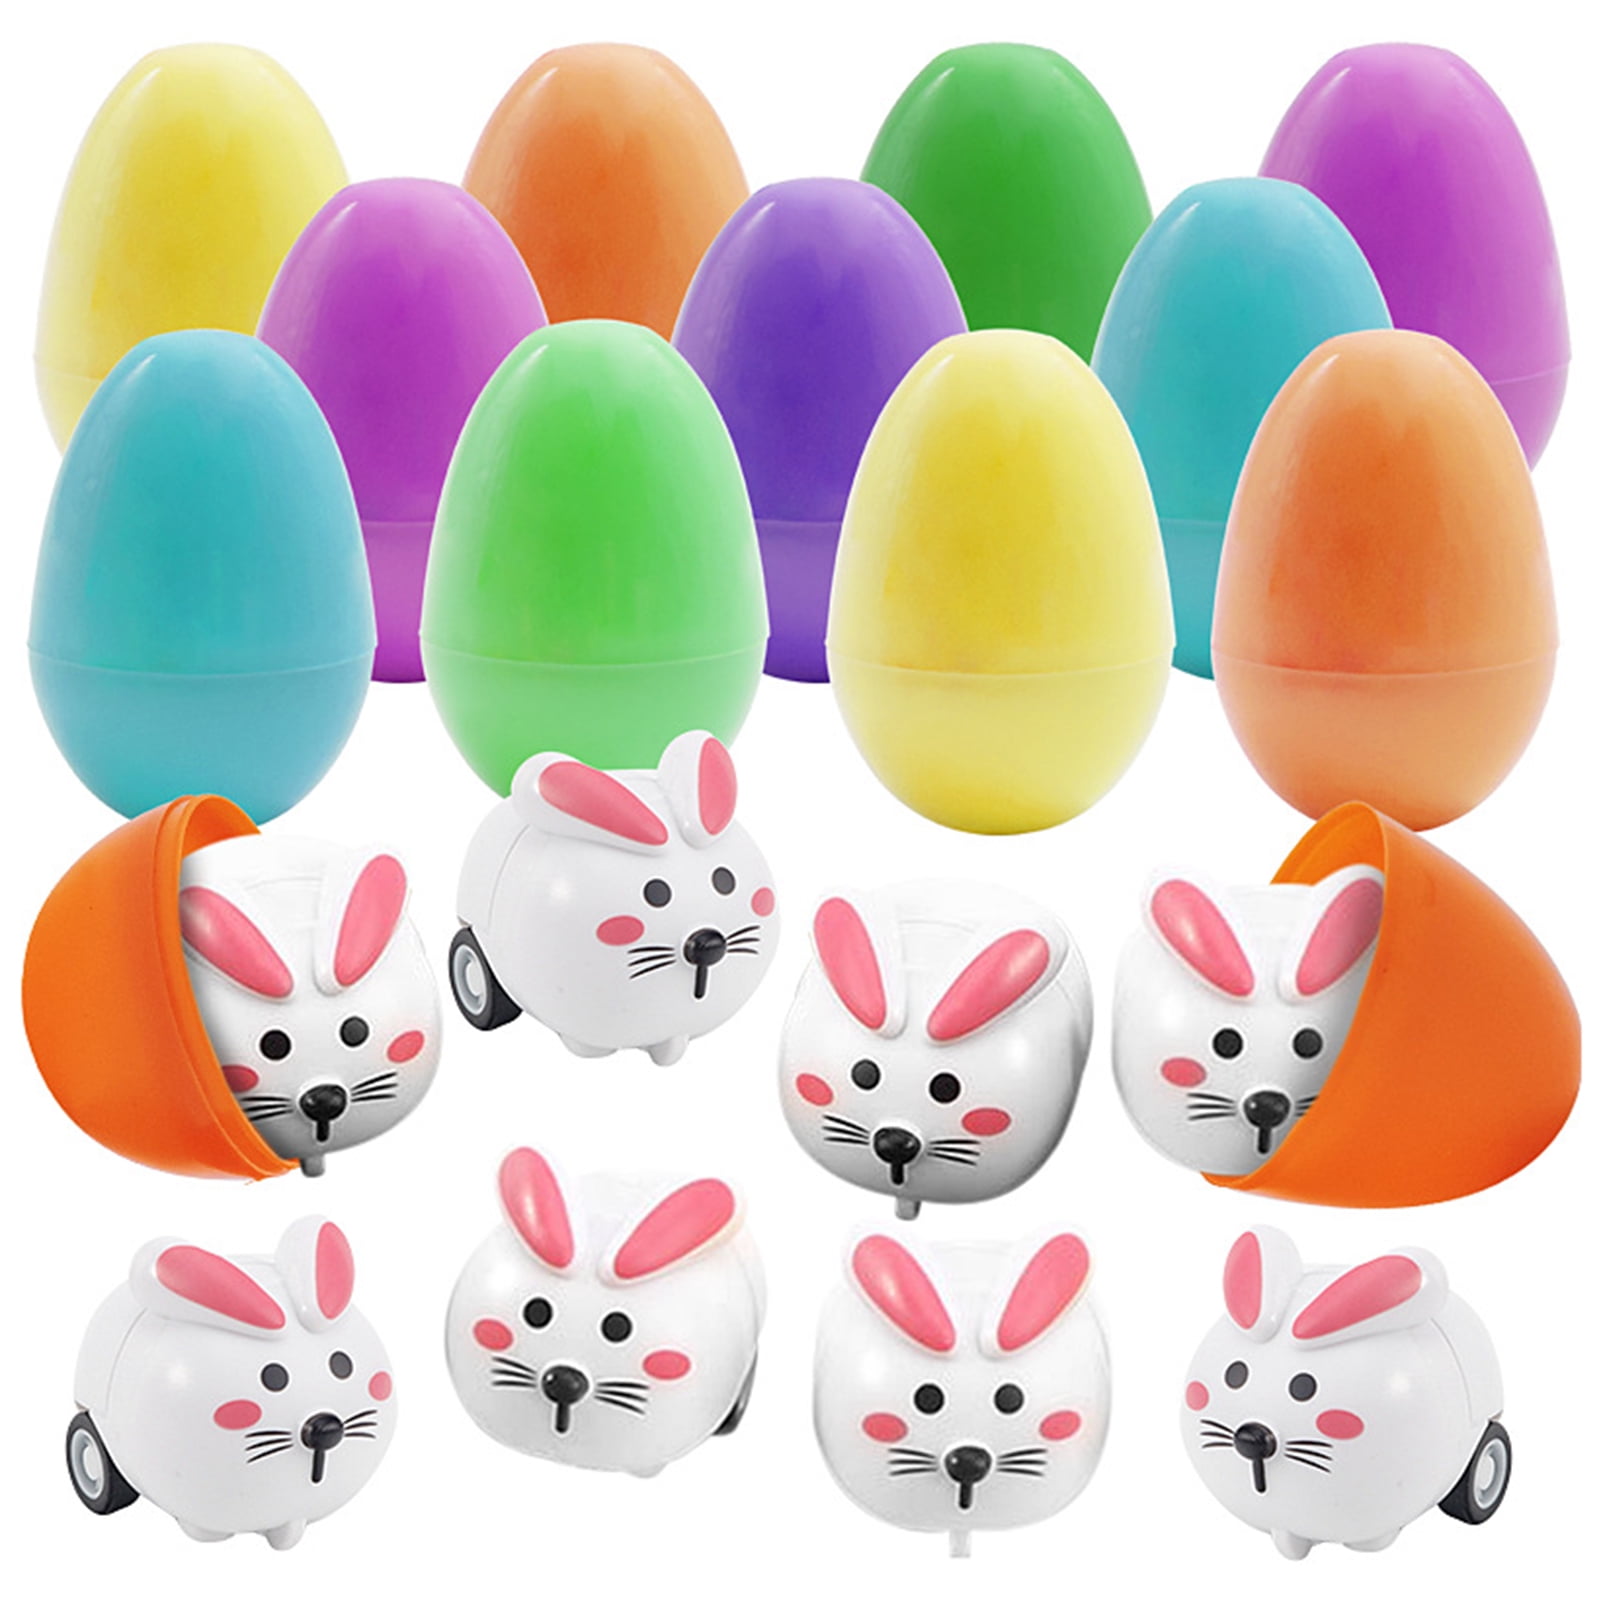 Complete Easter Egg Hunt Kit Fun Props & Colourful Surprise Eggs For Kids 